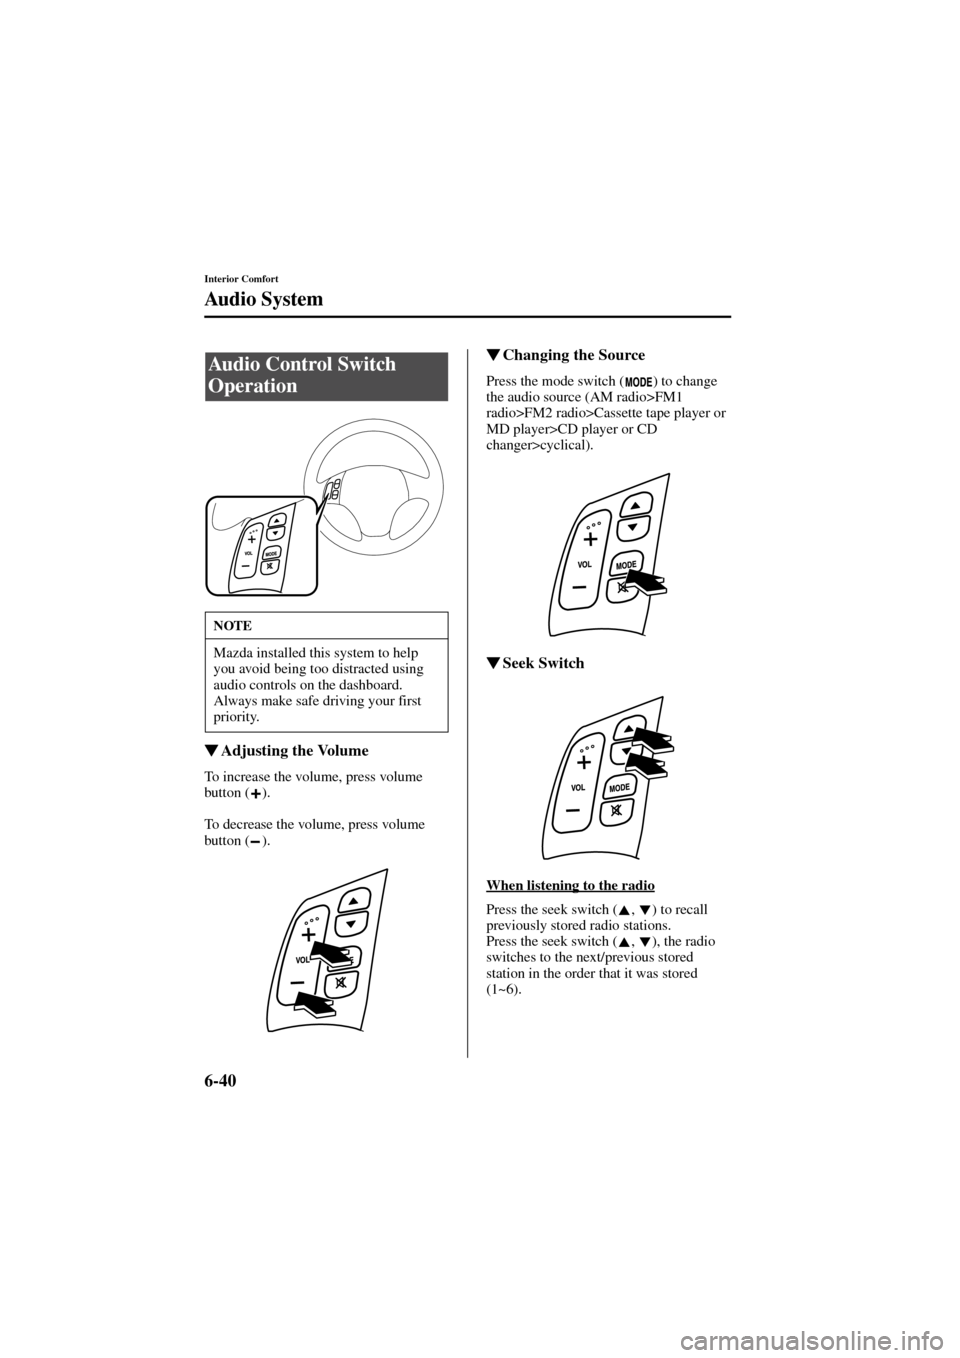 MAZDA MODEL 6 2004  Owners Manual (in English) 6-40
Interior Comfort
Audio System
Form No. 8R29-EA-02I
Adjusting the Volume
To increase the volume, press volume 
button ( ).
To decrease the volume, press volume 
button ( ).
Changing the Source
P